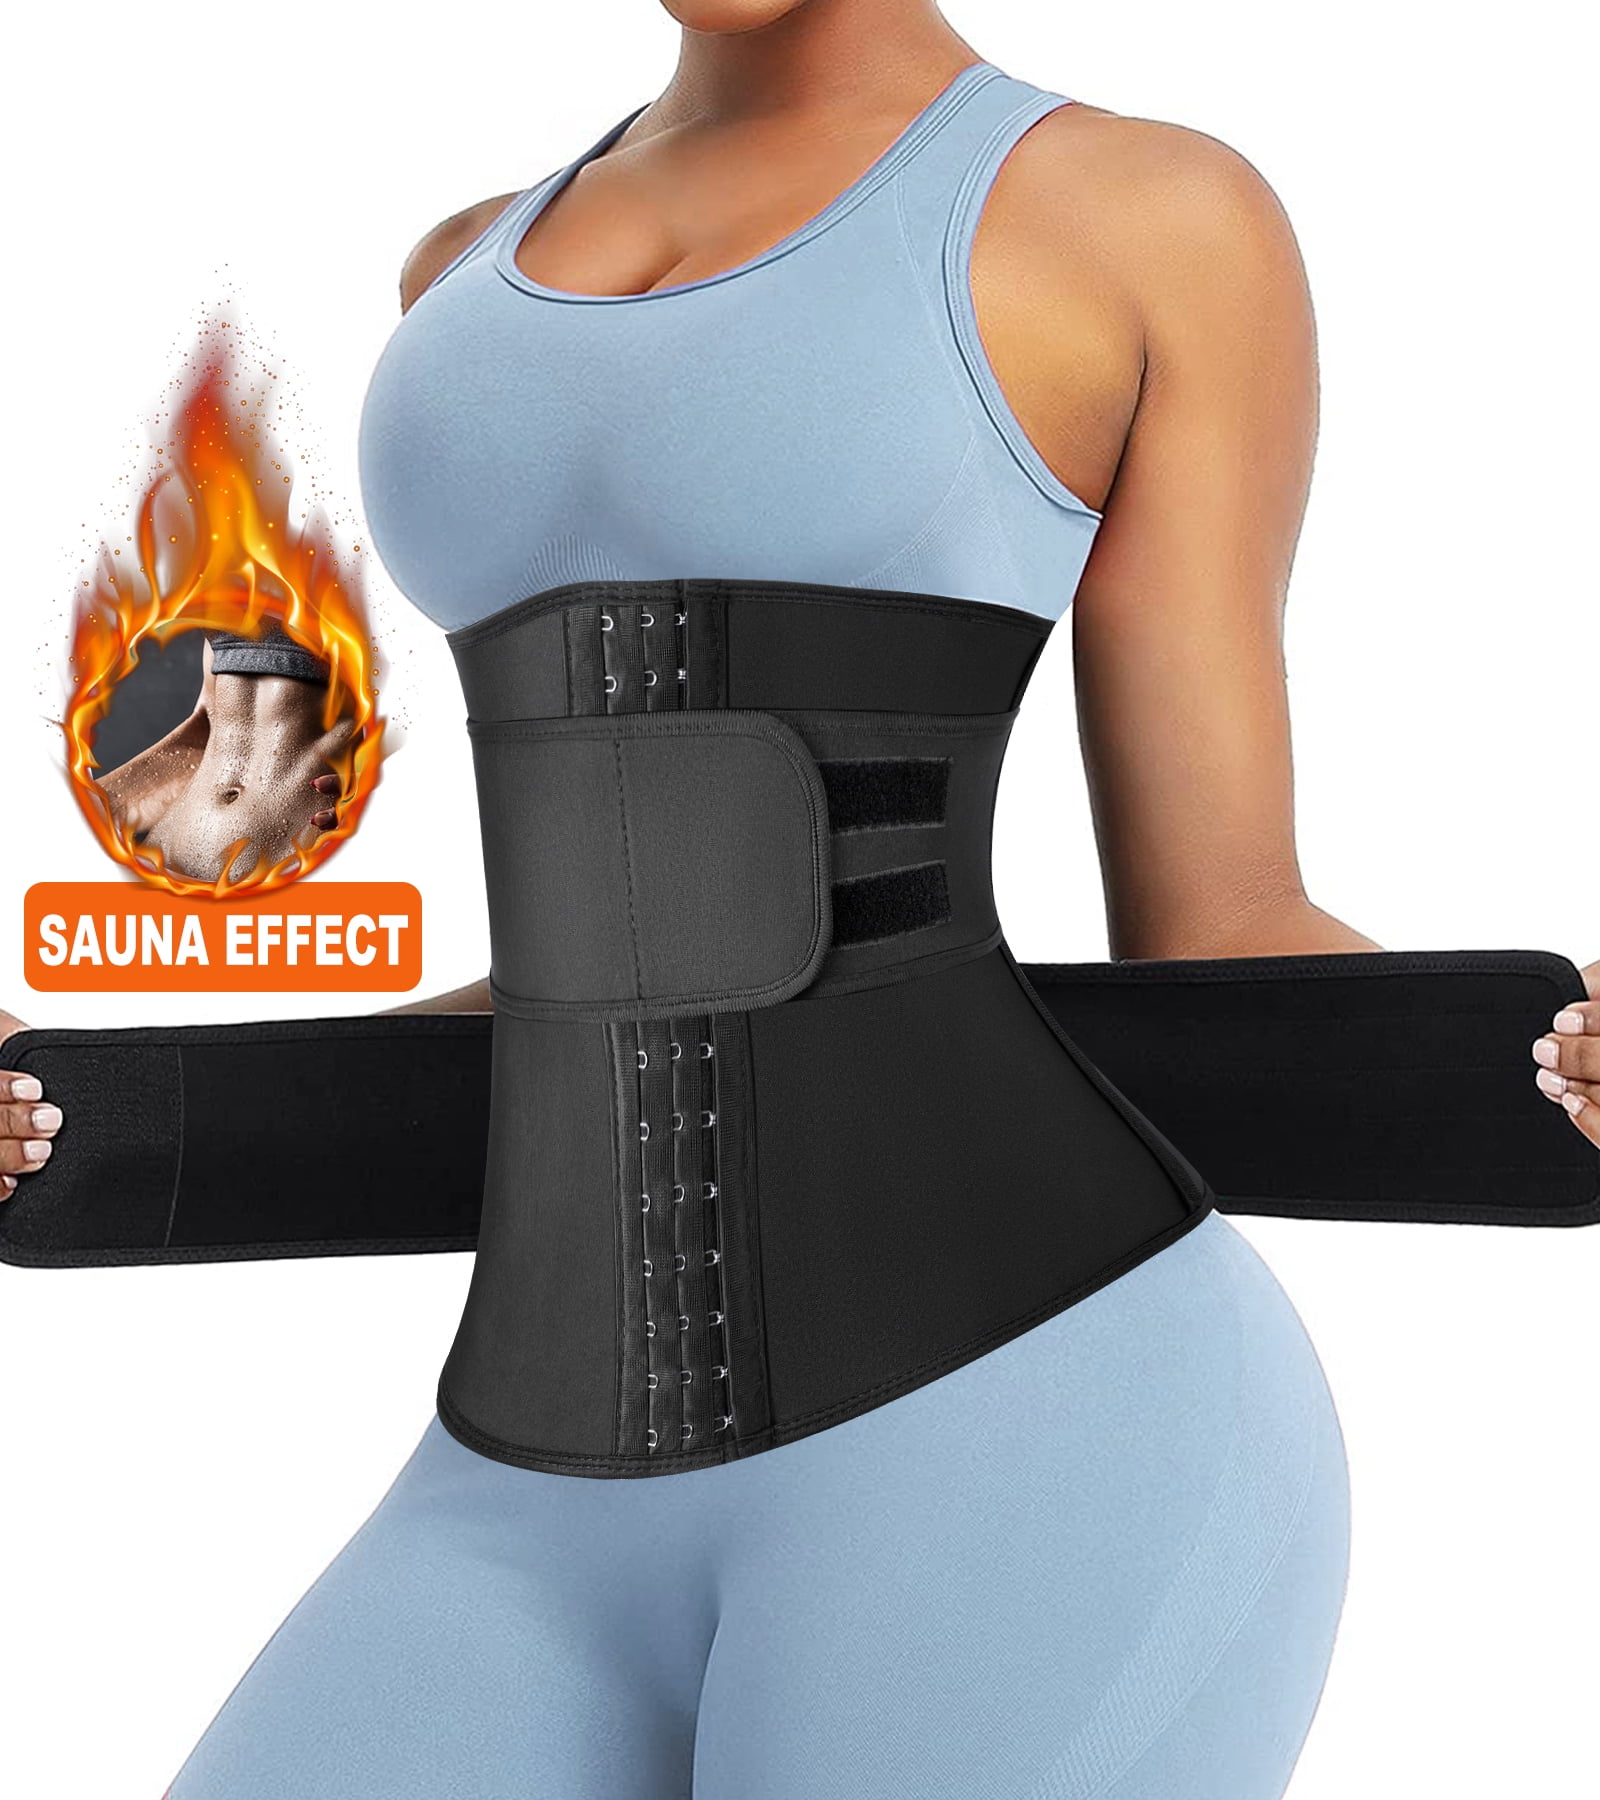 Details about   Women Exercise Abdomen Fitness Slim Sauna Yoga Tight Weight Loss Trainer Belt US 